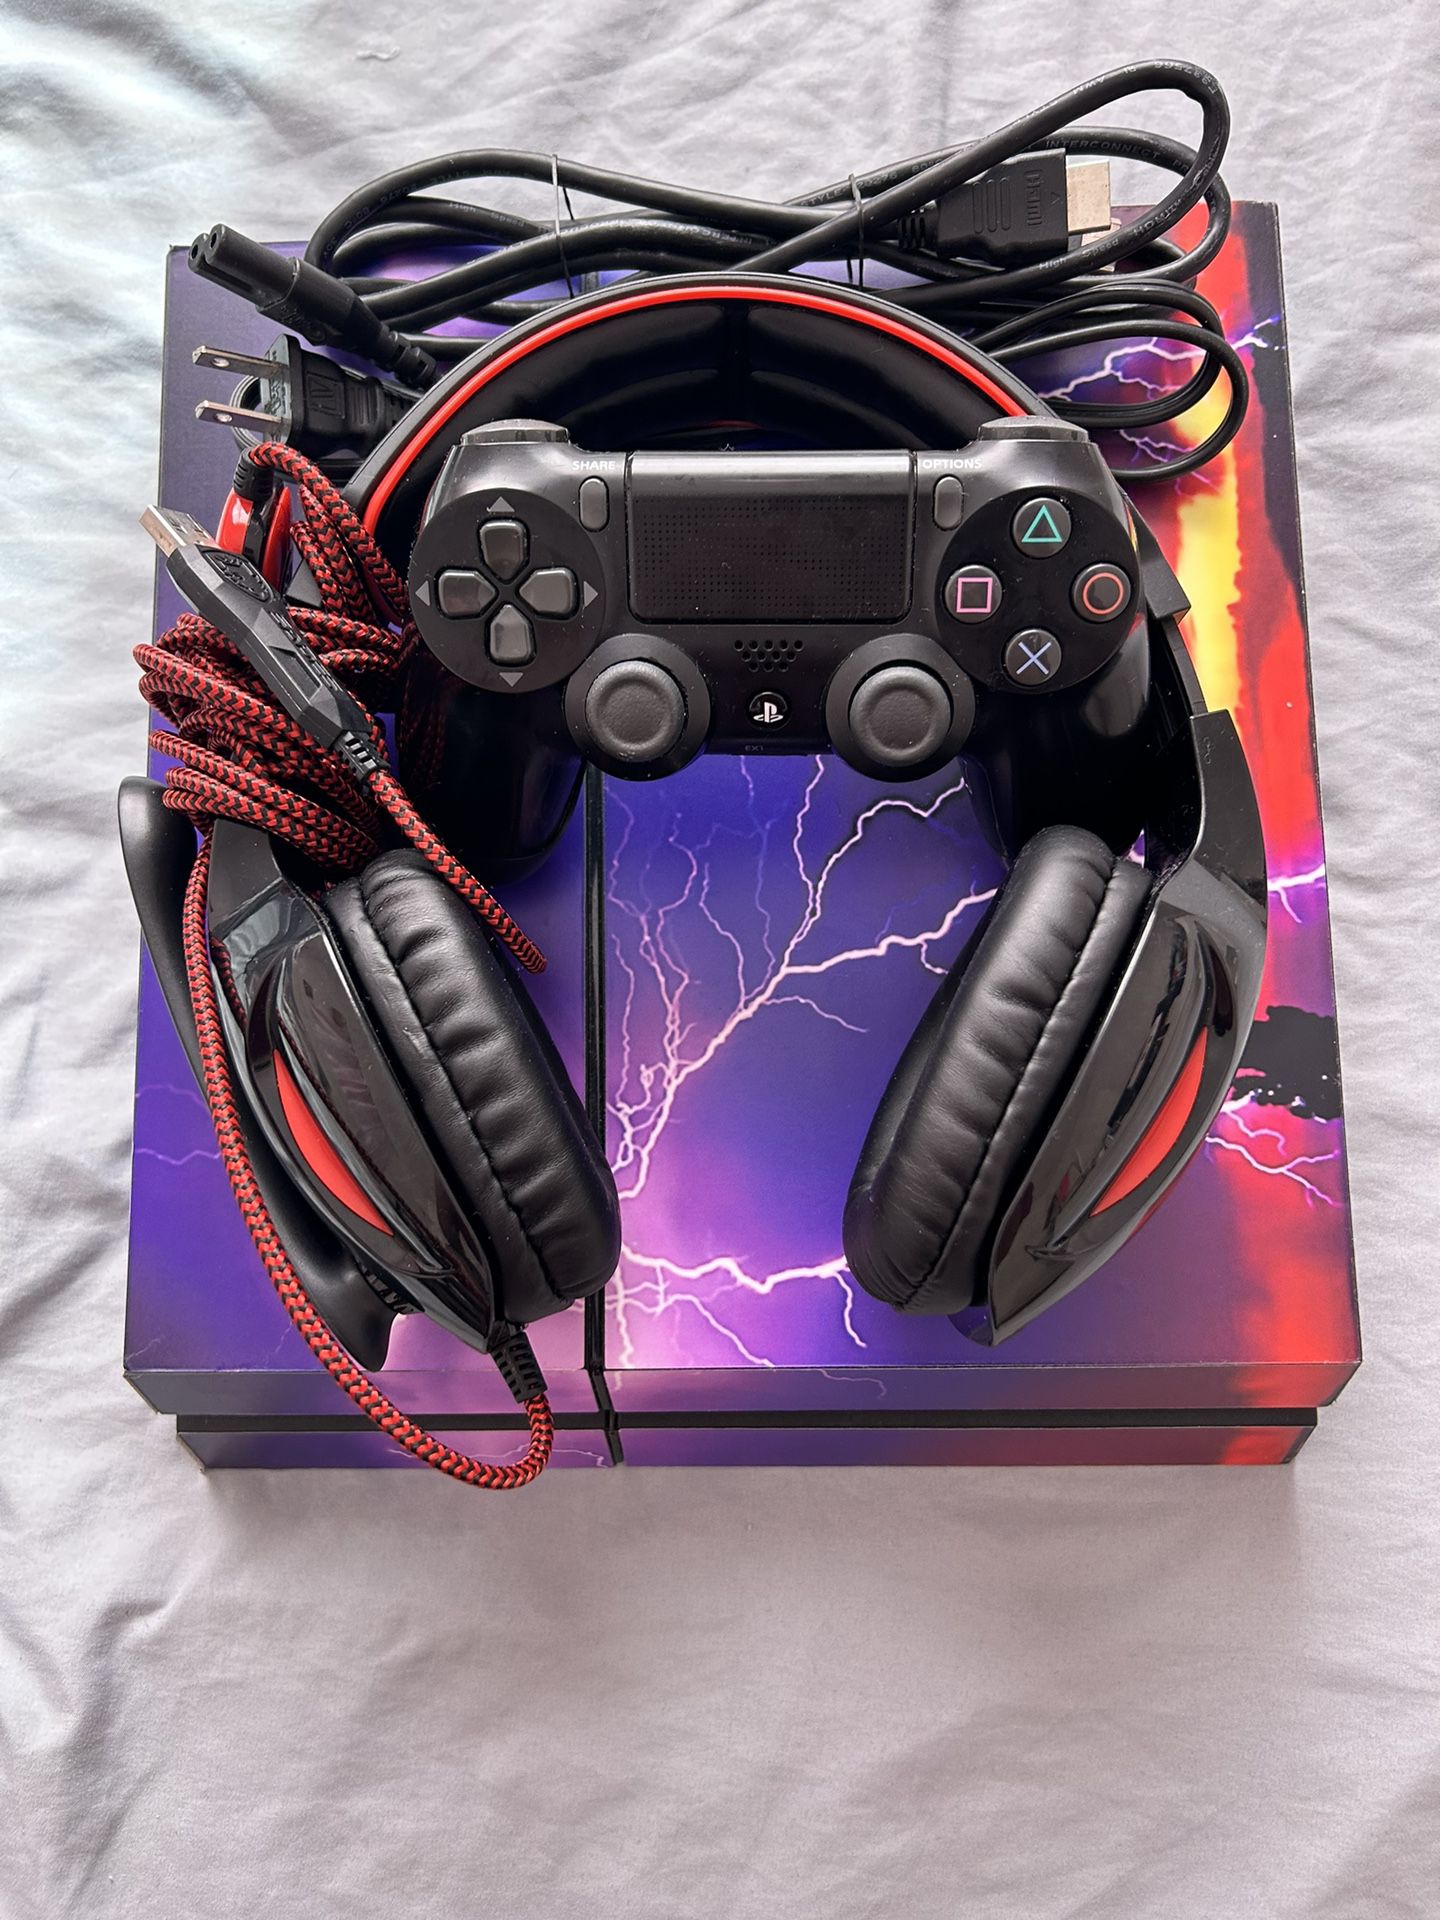 PS4 with BLACK SONY CONTROLLER HEADPHONES and CORDS